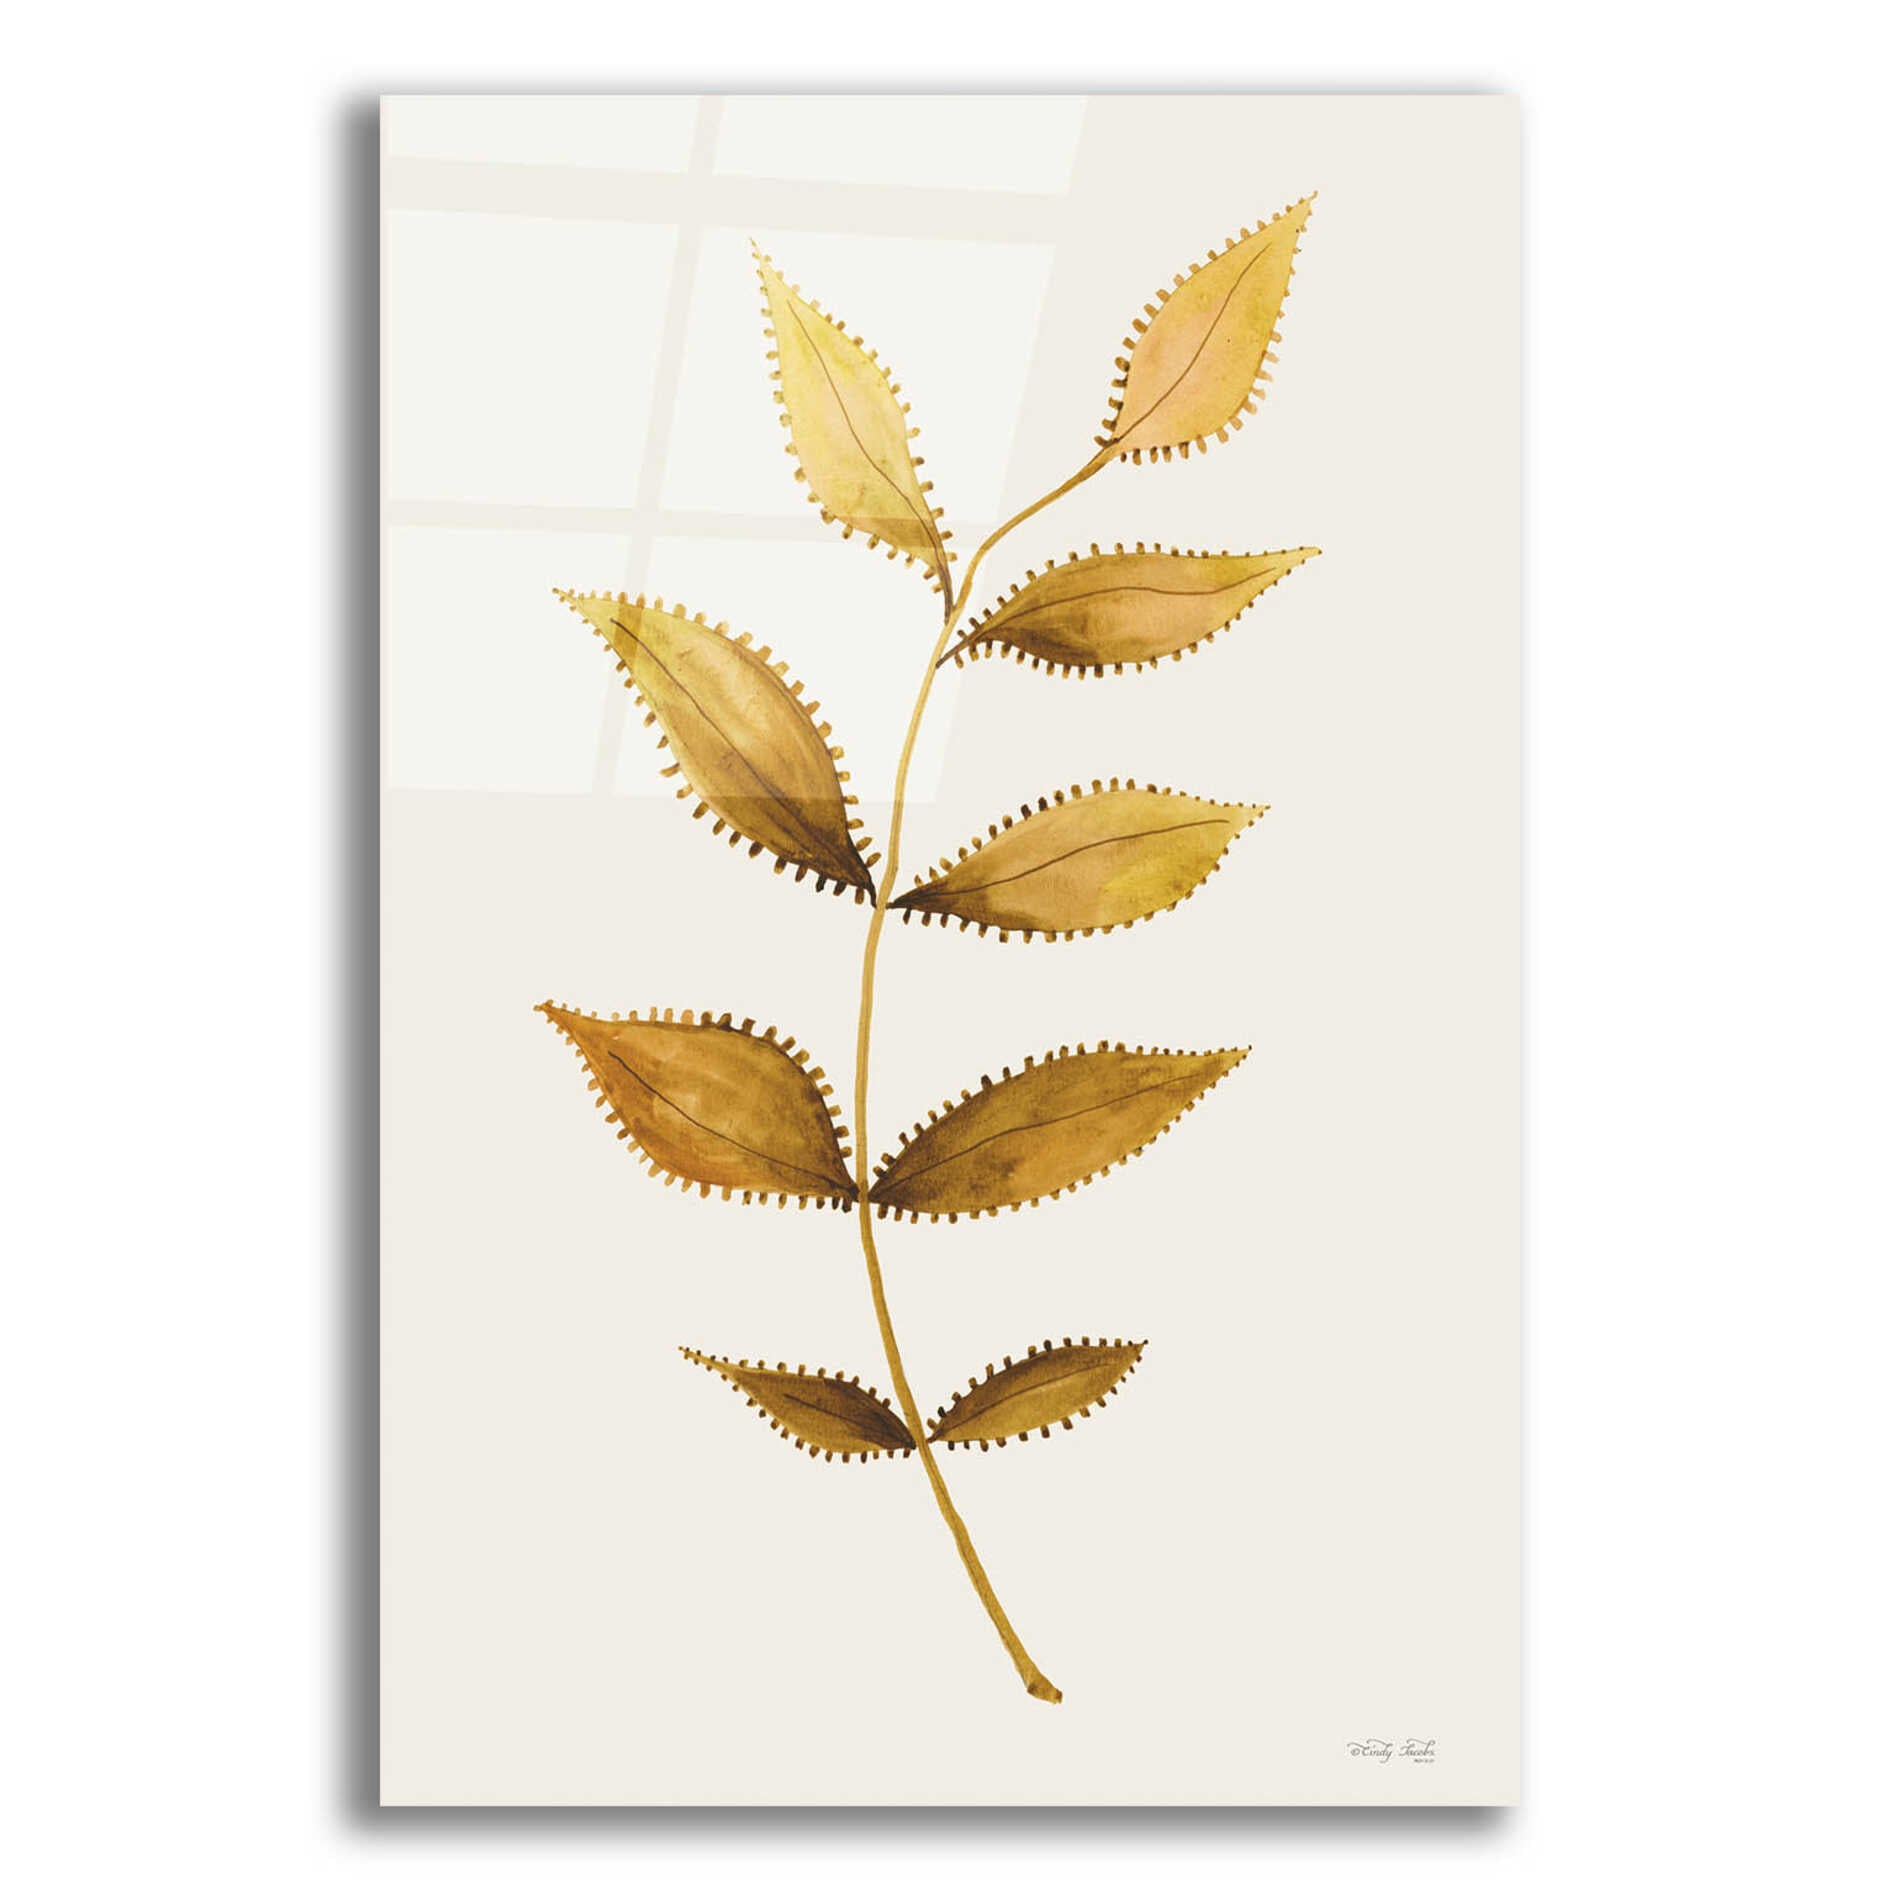 Epic Art 'Golden Spotted Leaves' by Cindy Jacobs, Acrylic Glass Wall Art,12x16